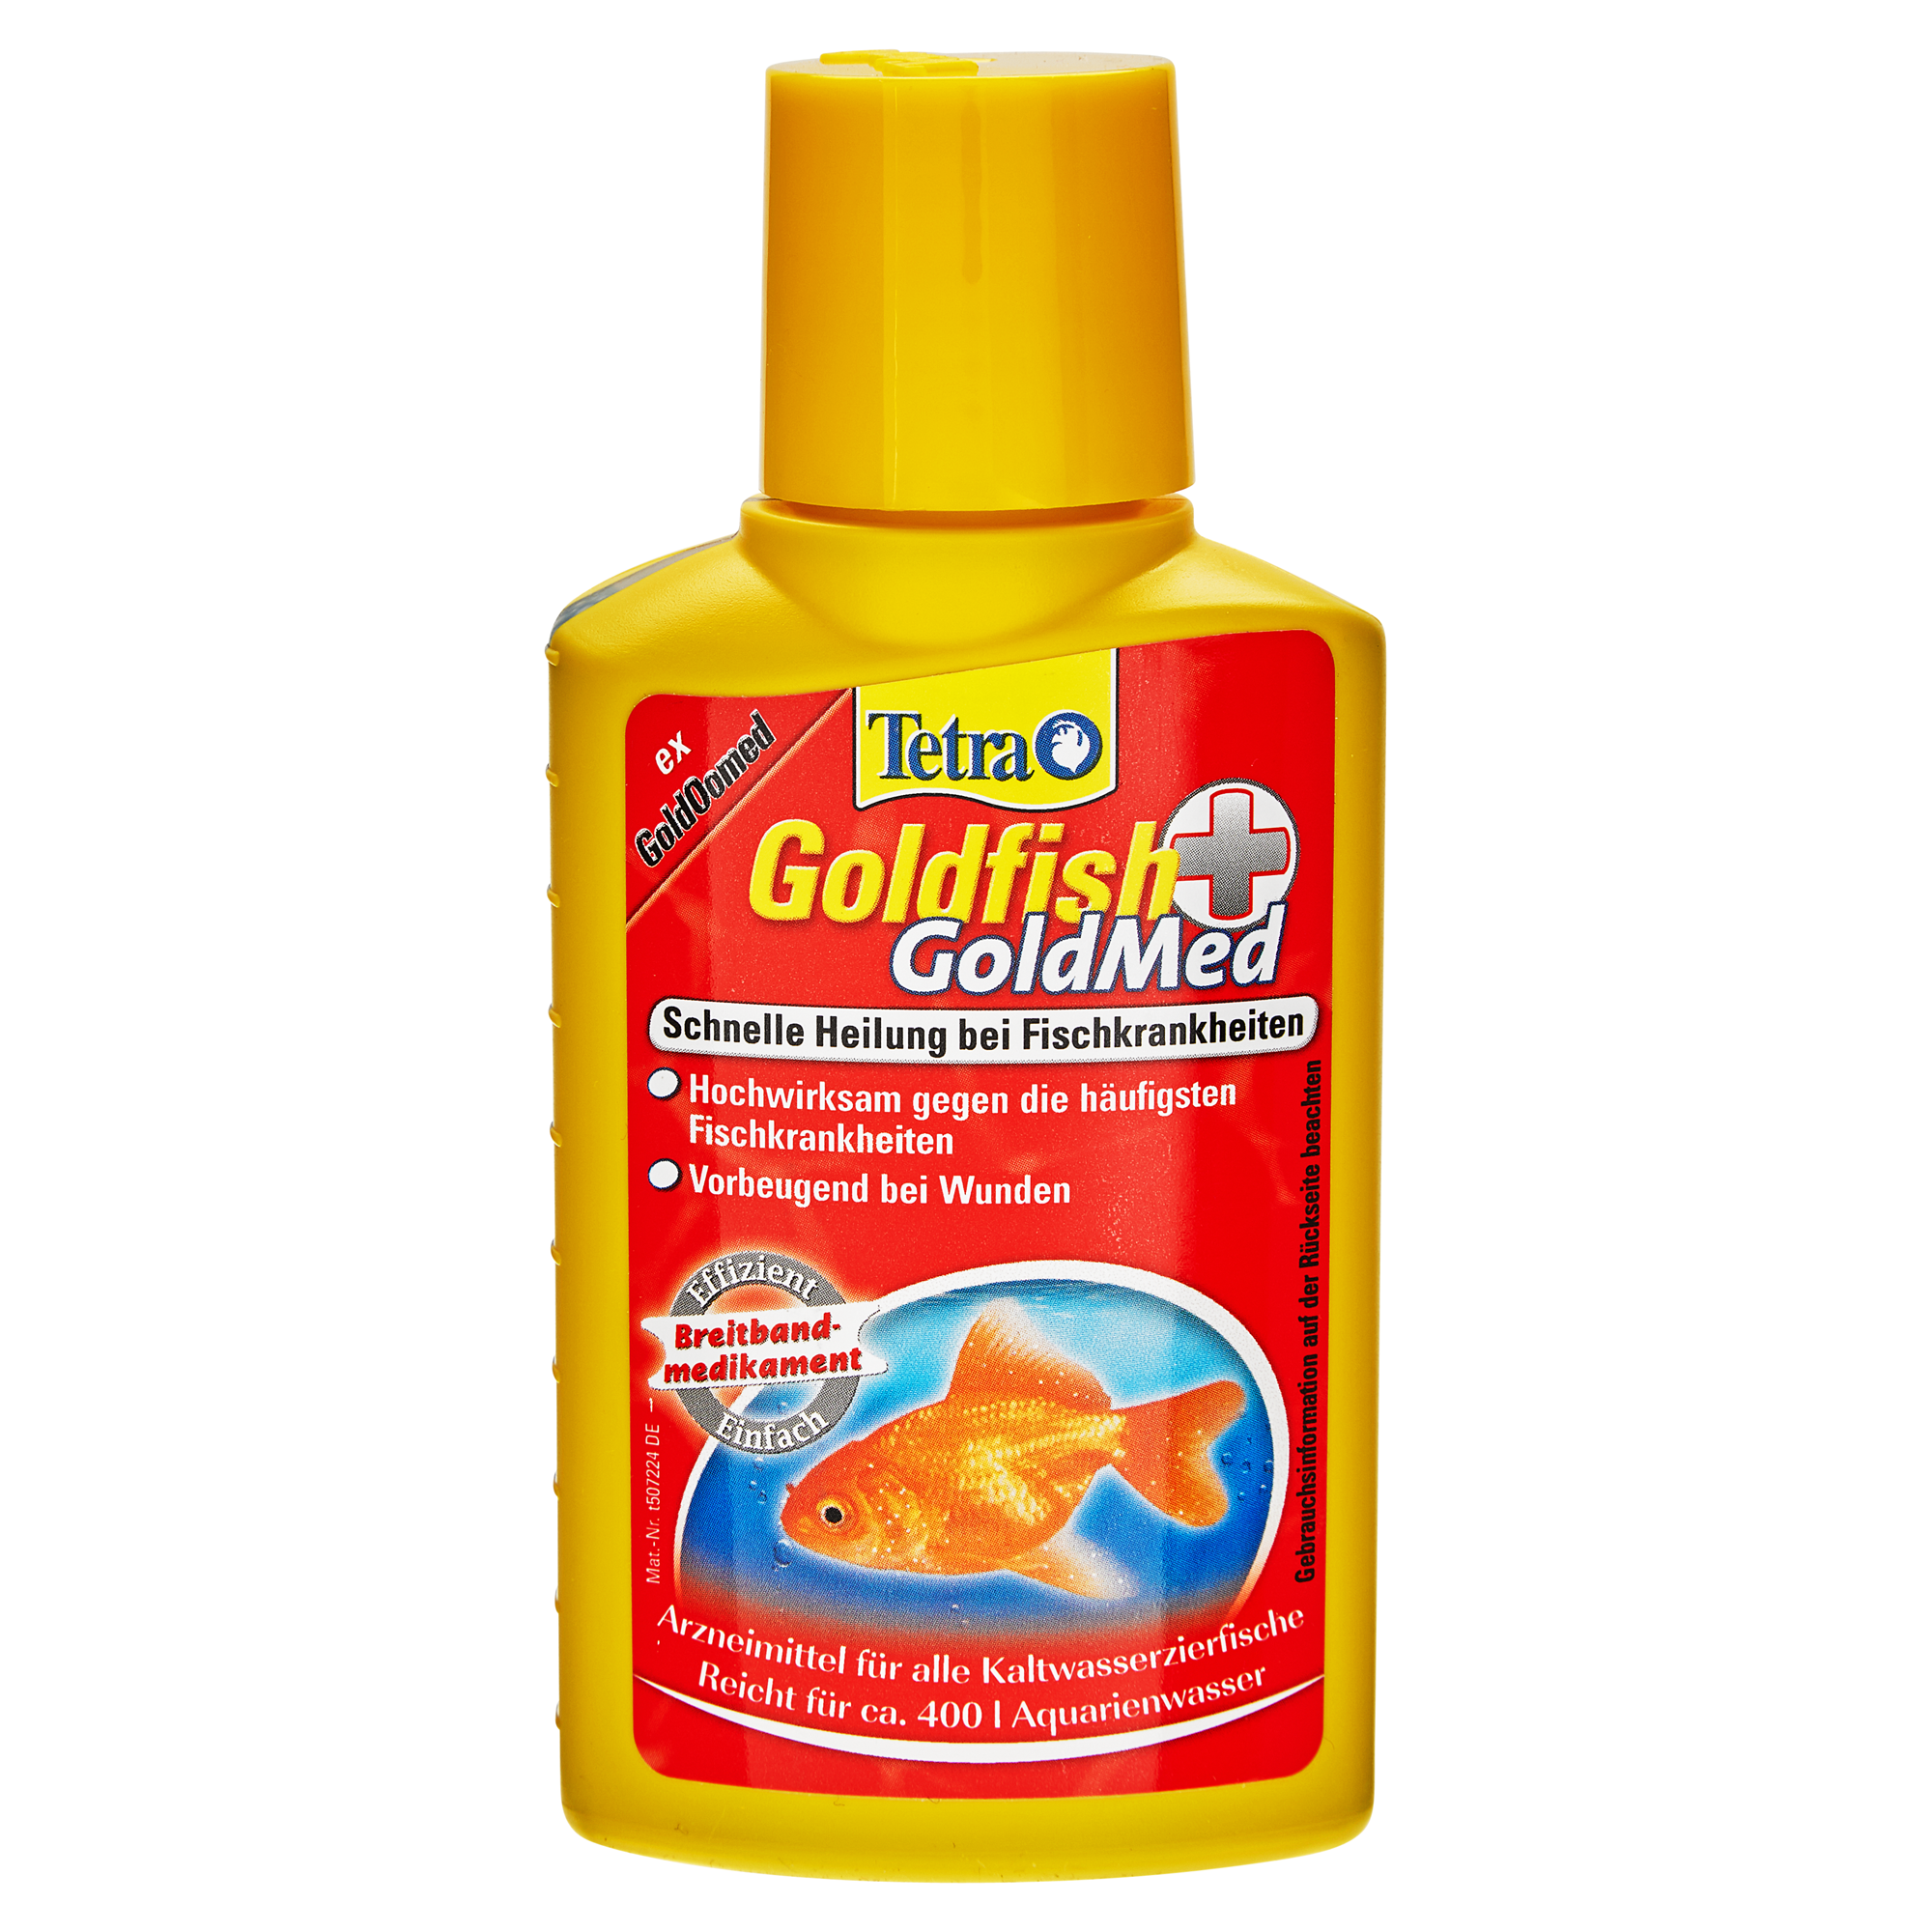 Fischarznei "Goldfish" GoldMed 100 ml + product picture